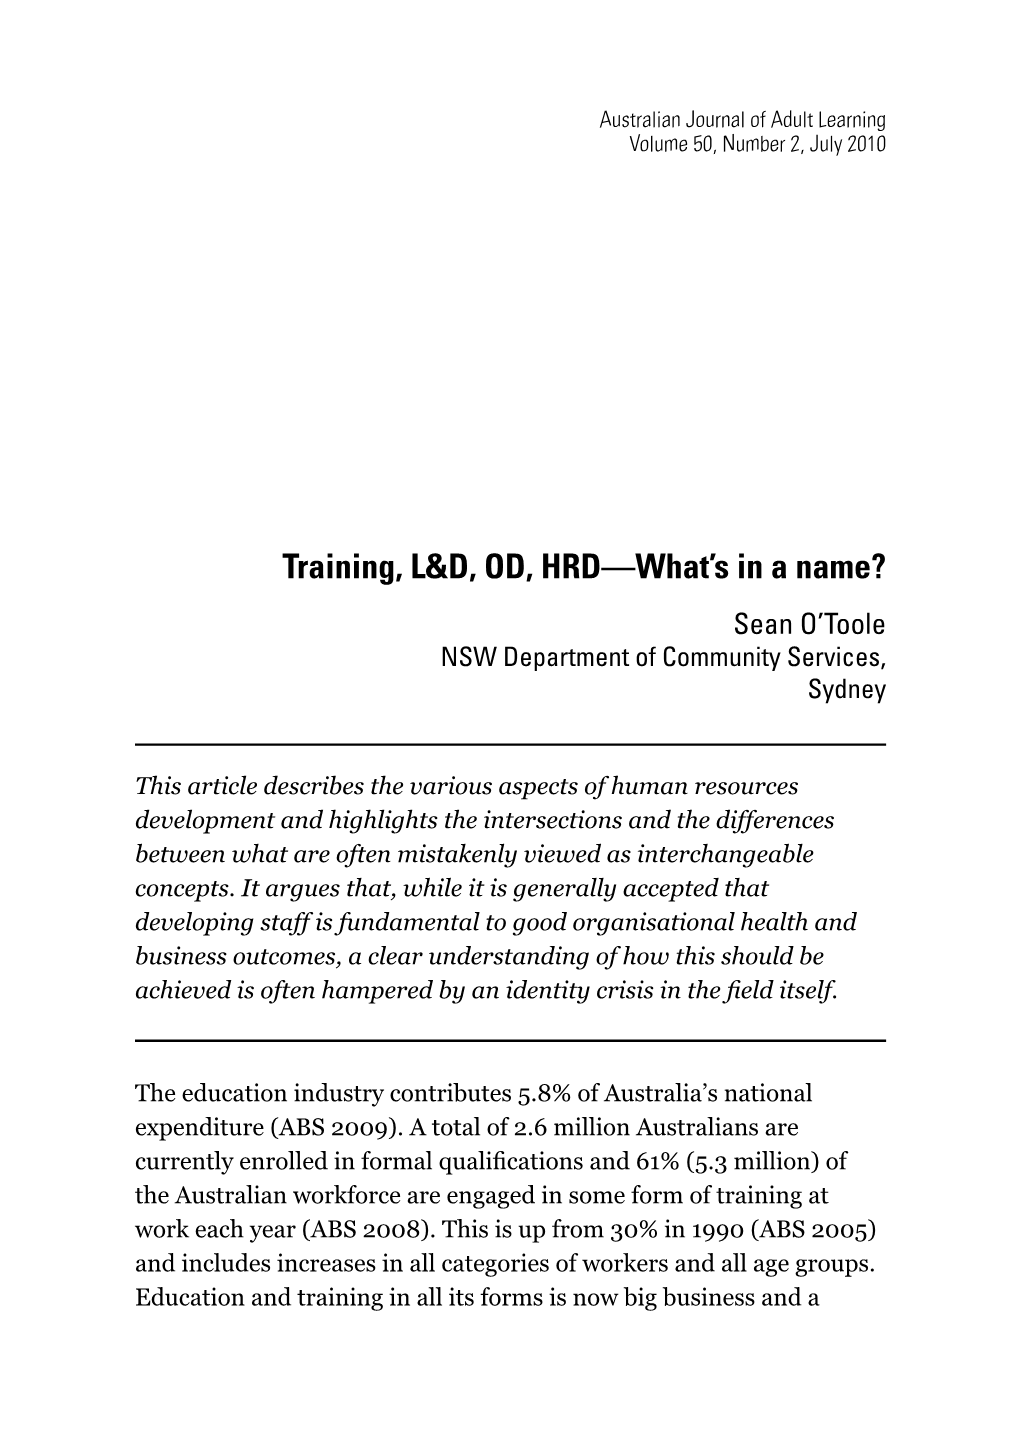 Training, L&D, OD, HRD—What's in a Name?